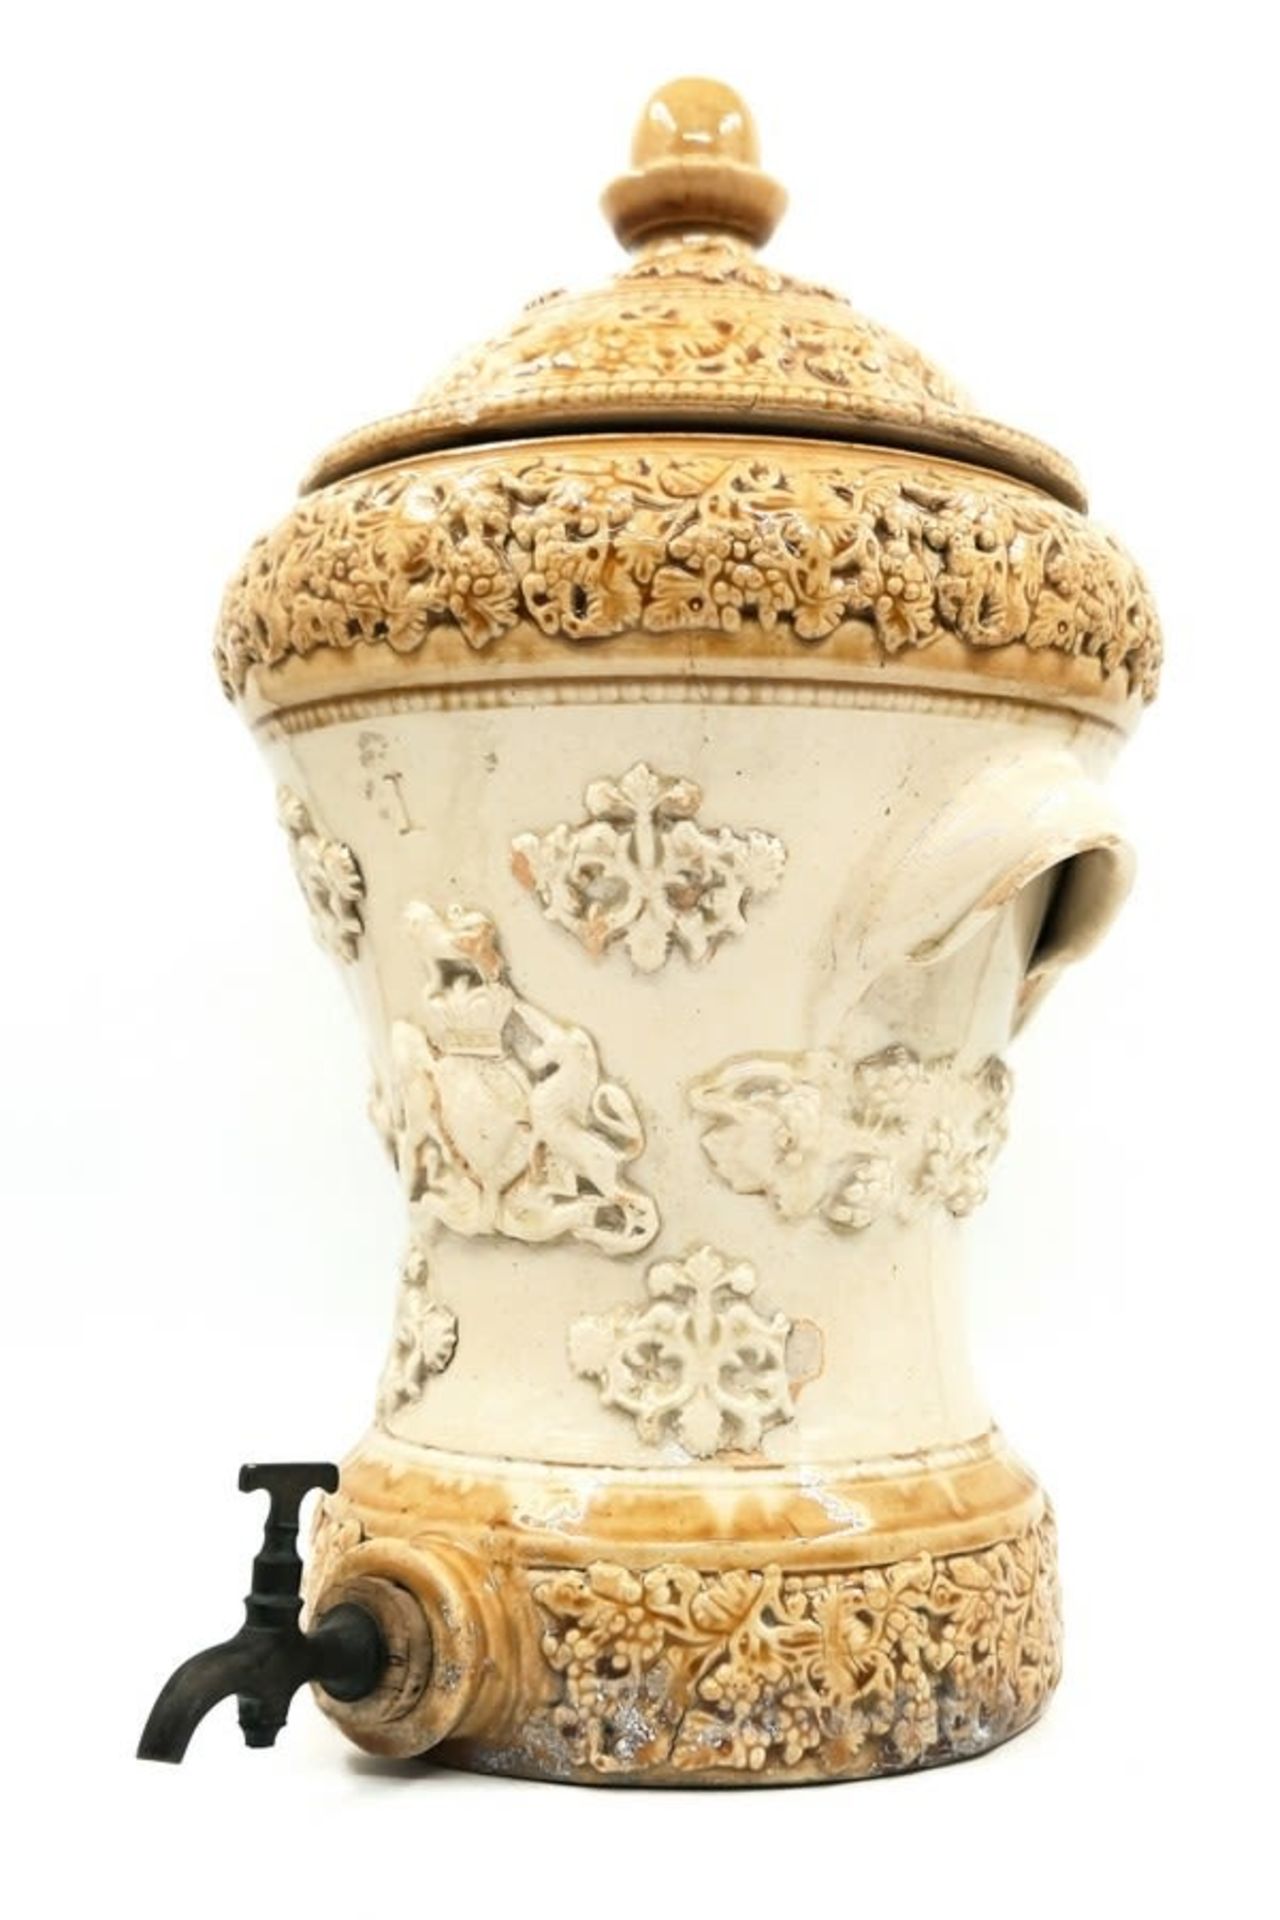 Antique English water tank from the 19th century, made of ceramic, cork stopper and metal faucet,